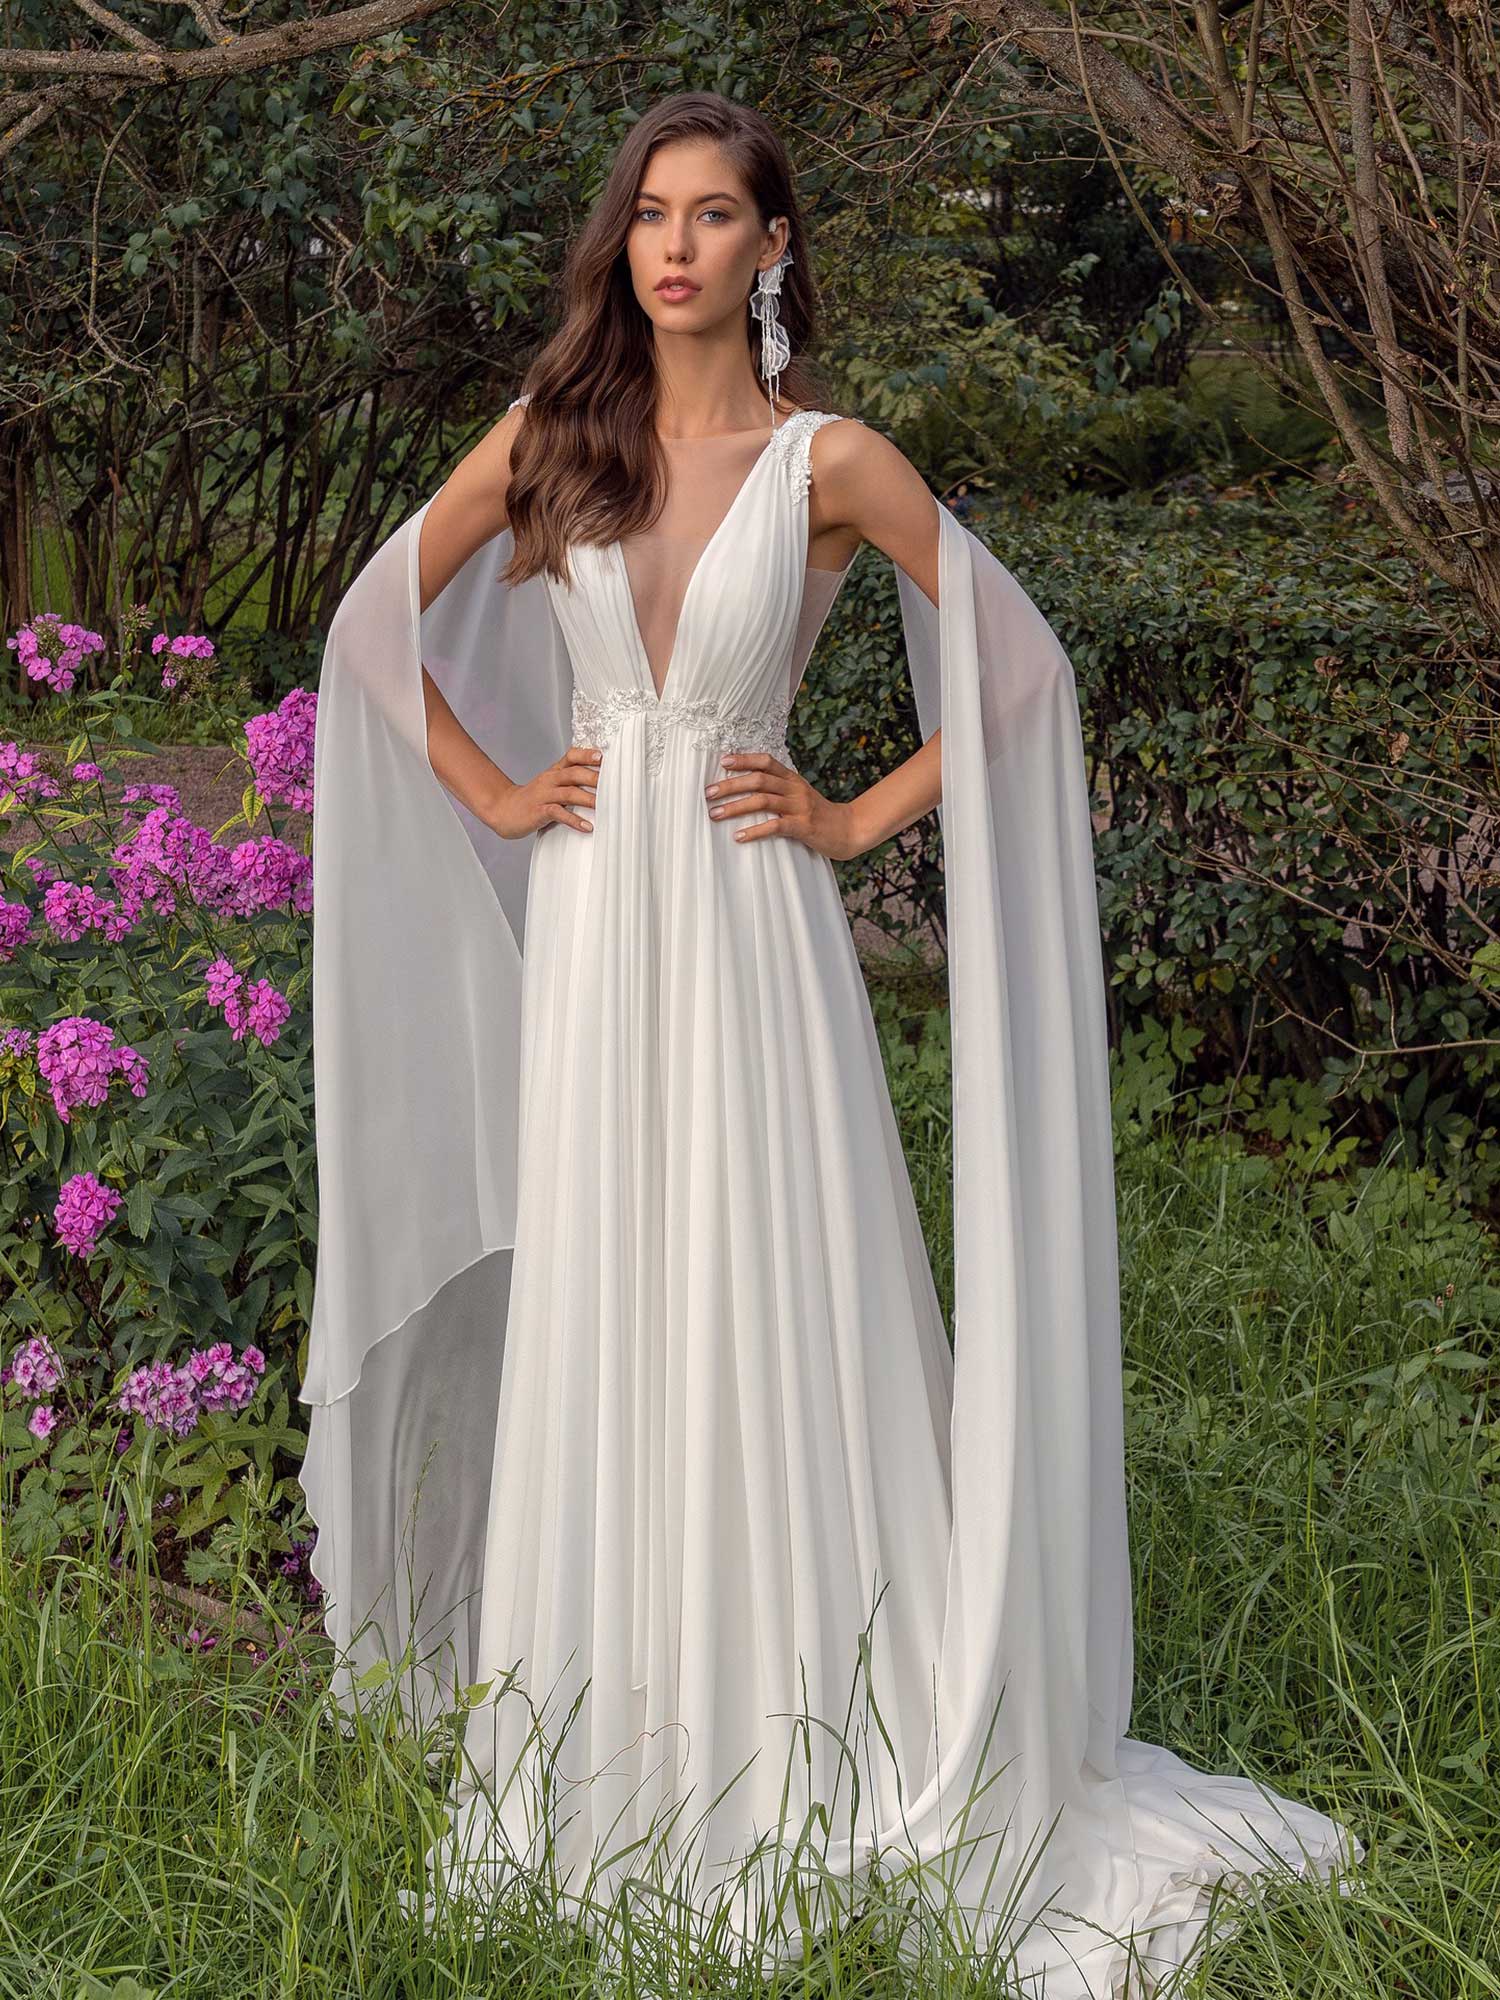 Plunging neckline chiffon wedding dress with detachable cape sleeves ...